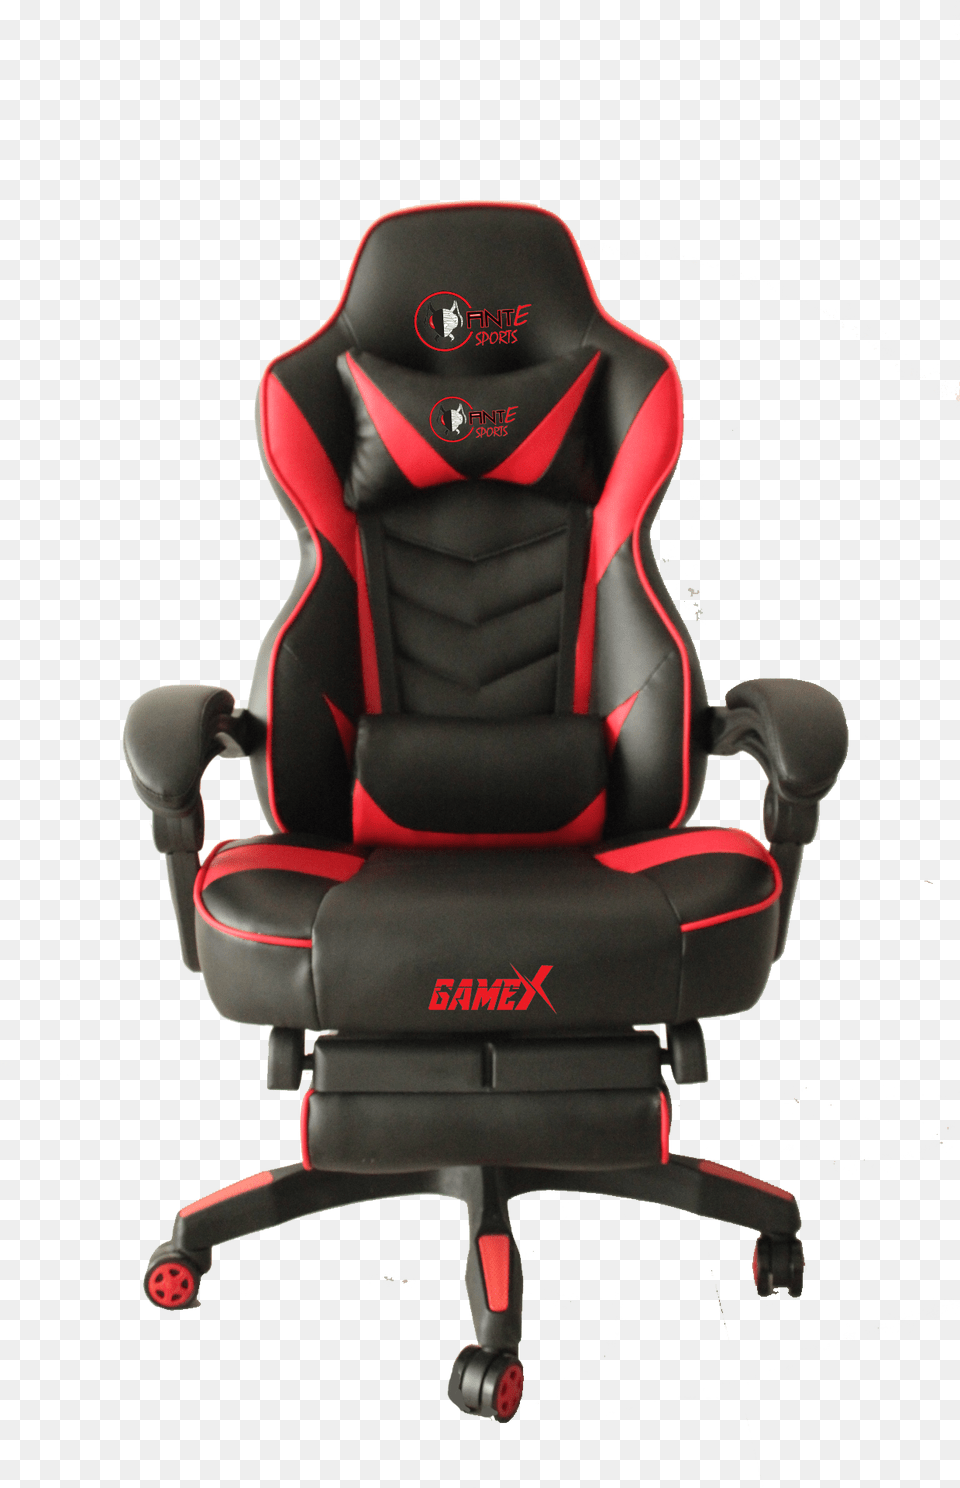 Gamex Royale Ant Esports Gamex Royale, Chair, Cushion, Furniture, Home Decor Png